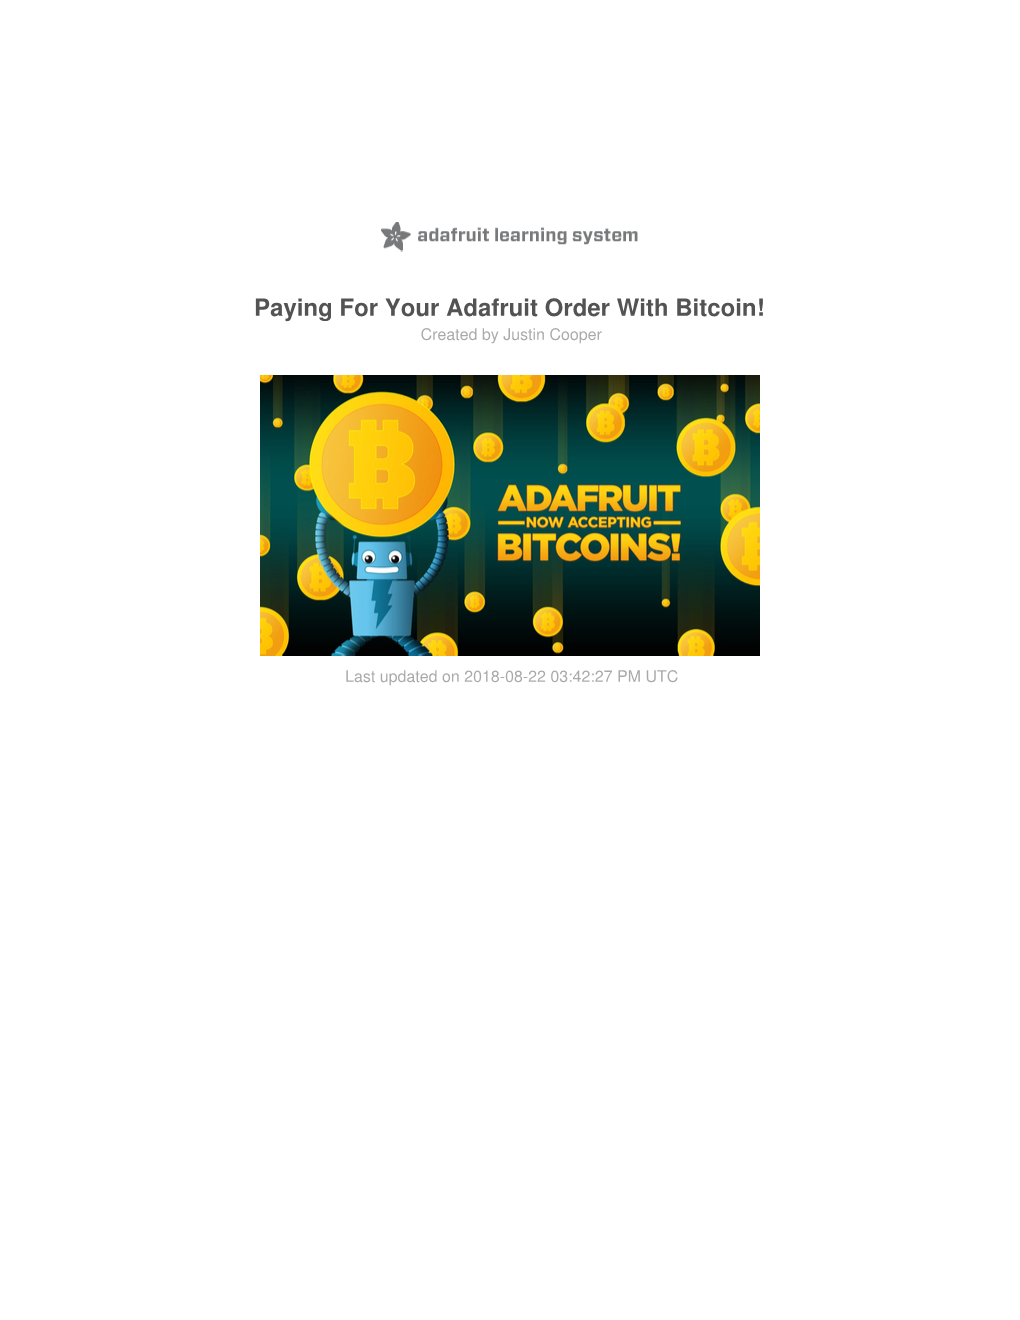 Paying for Your Adafruit Order with Bitcoin! Created by Justin Cooper